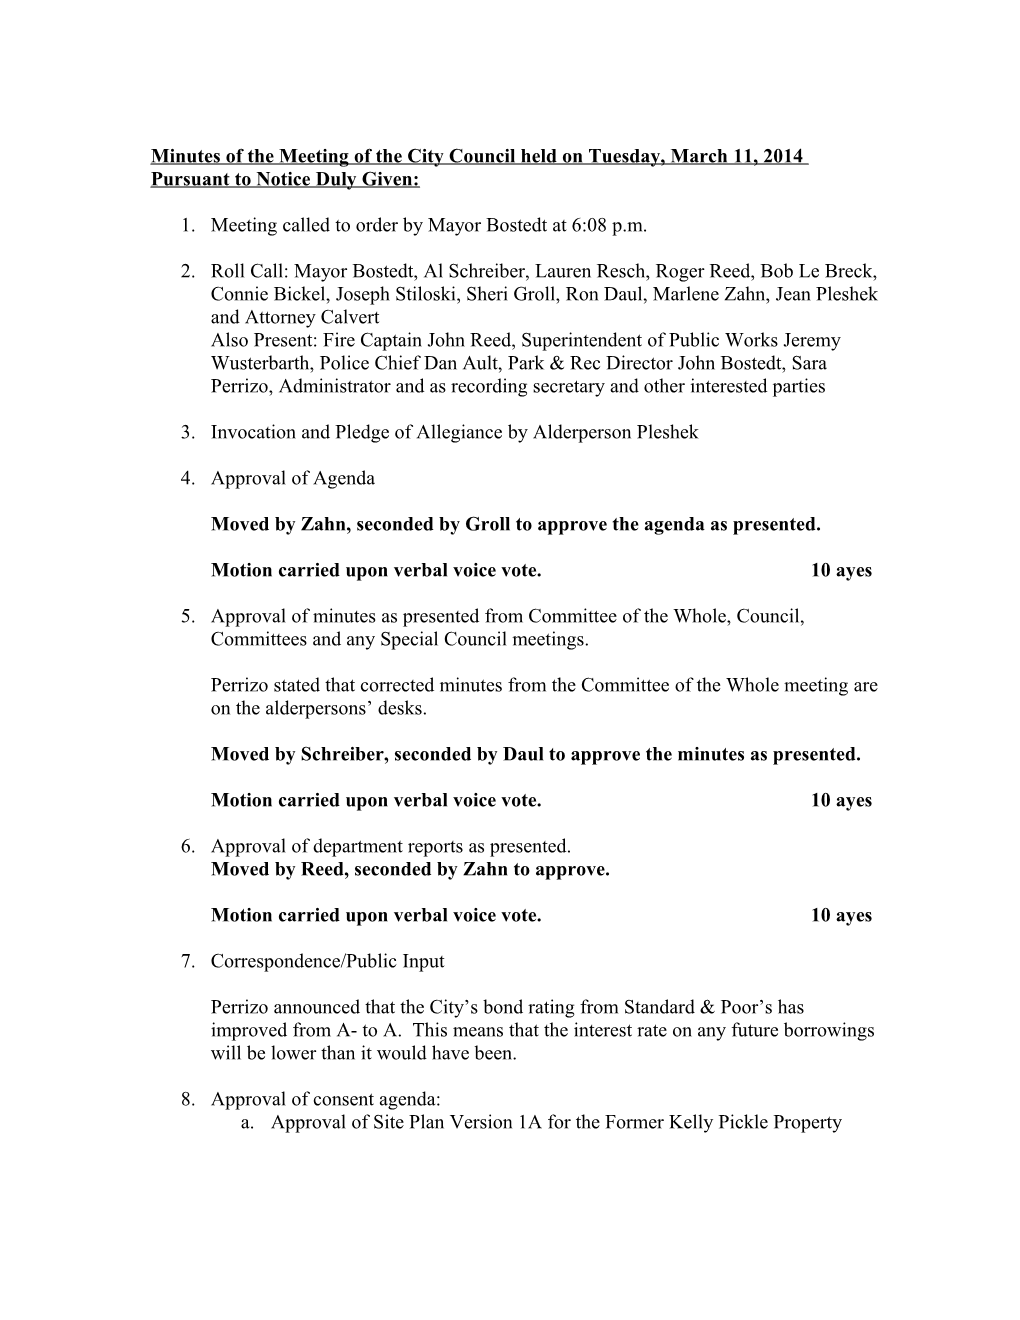 Minutes of the Meeting of the City Council Held on Tuesday, March 11, 2014 Pursuant To